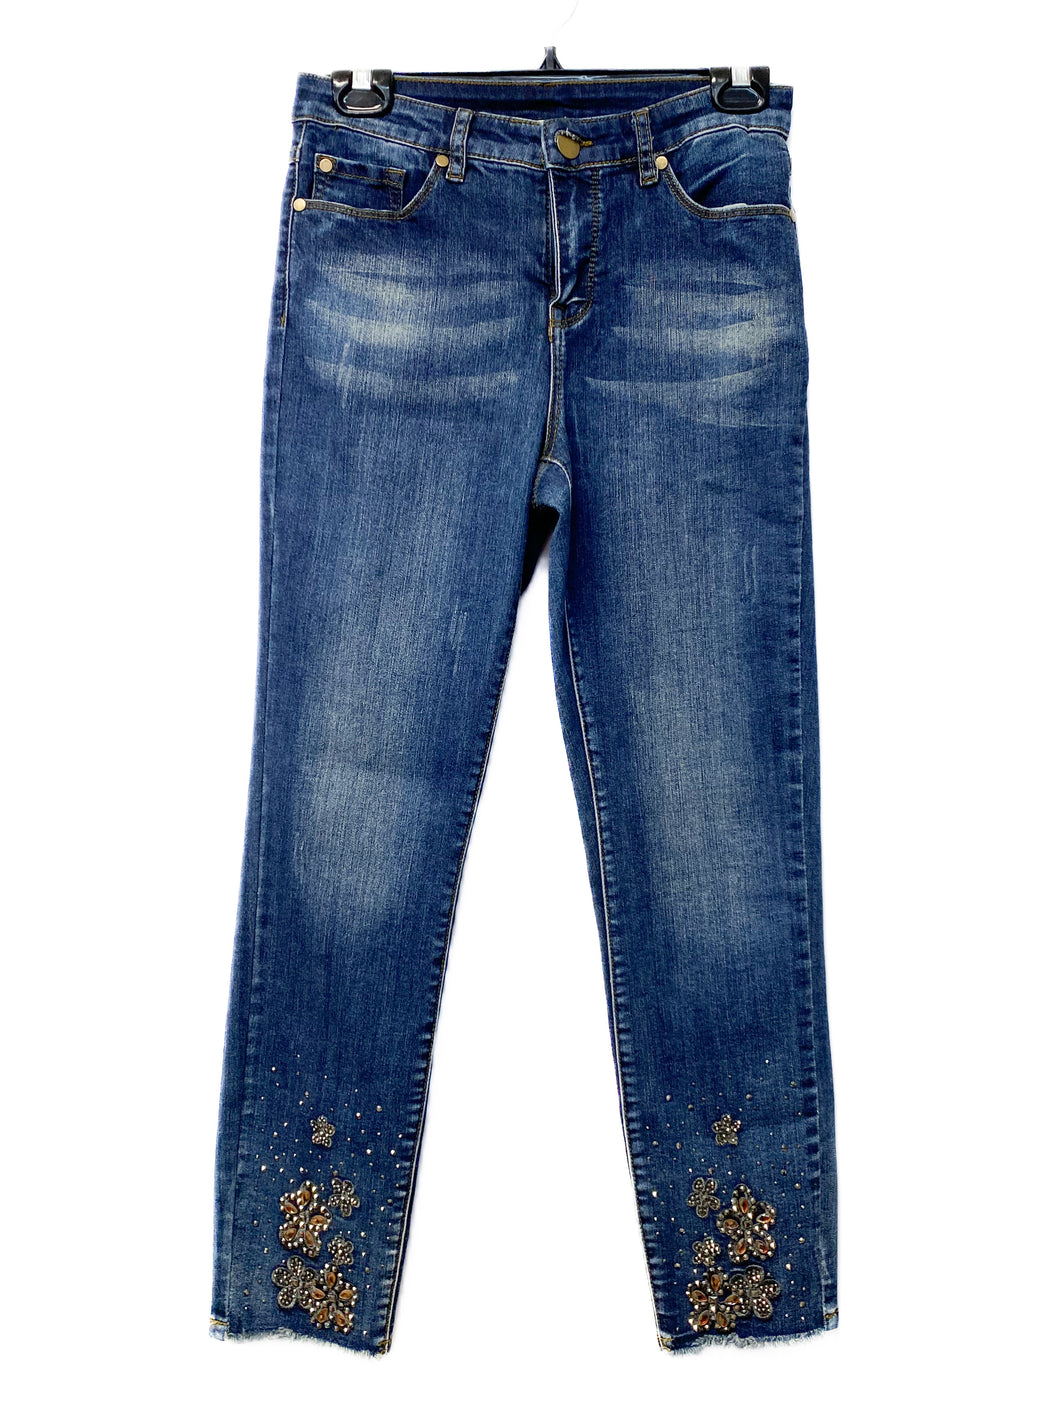 Northern Reflections Jeans (4)